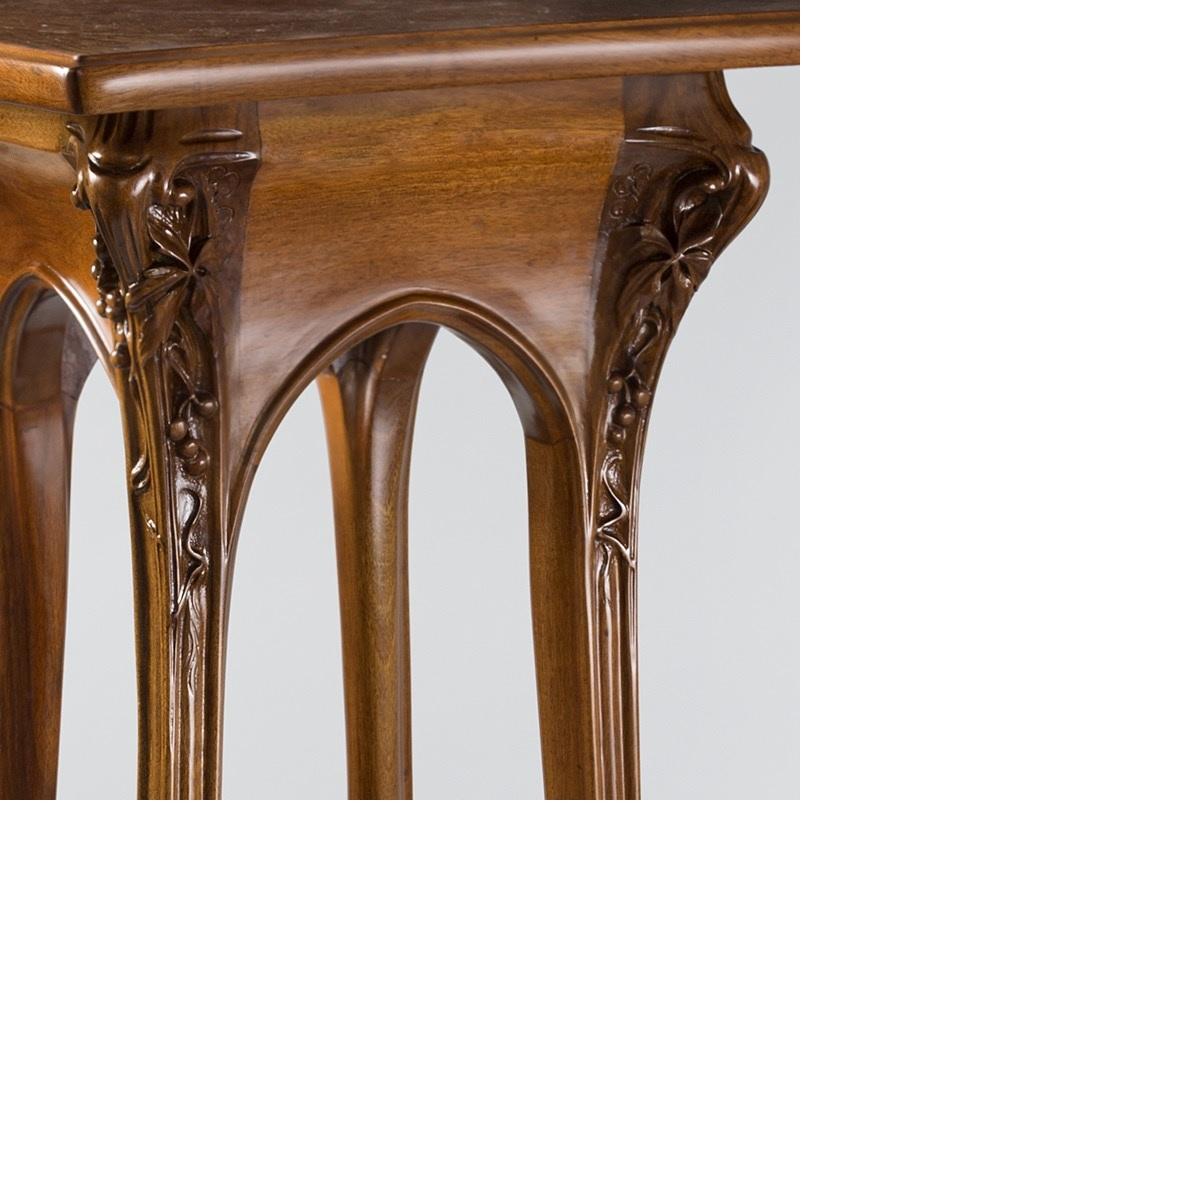 A French Art Nouveau walnut three-tiered pedestal by Louis Majorelle, featuring a rotating tray on the top. Leaves and berries adorn the upper portion of the legs. The gently curving legs are also deeply carved, circa 1900. 

Firmly rooted in the